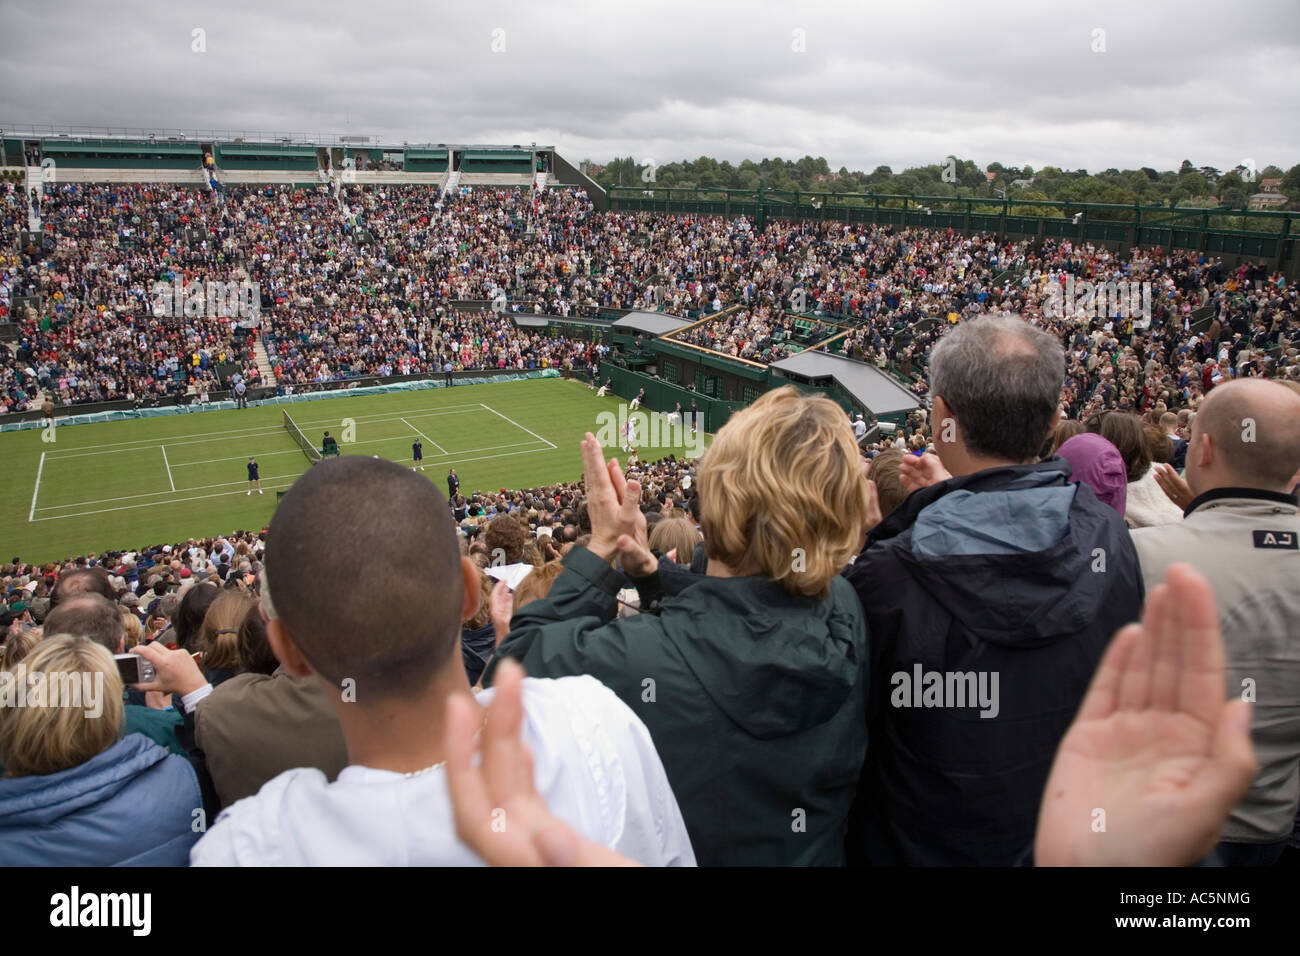 Spectators clapping Federer victory in opening game at Centre Court Wimbledon tennis Championship UK Stock Photo